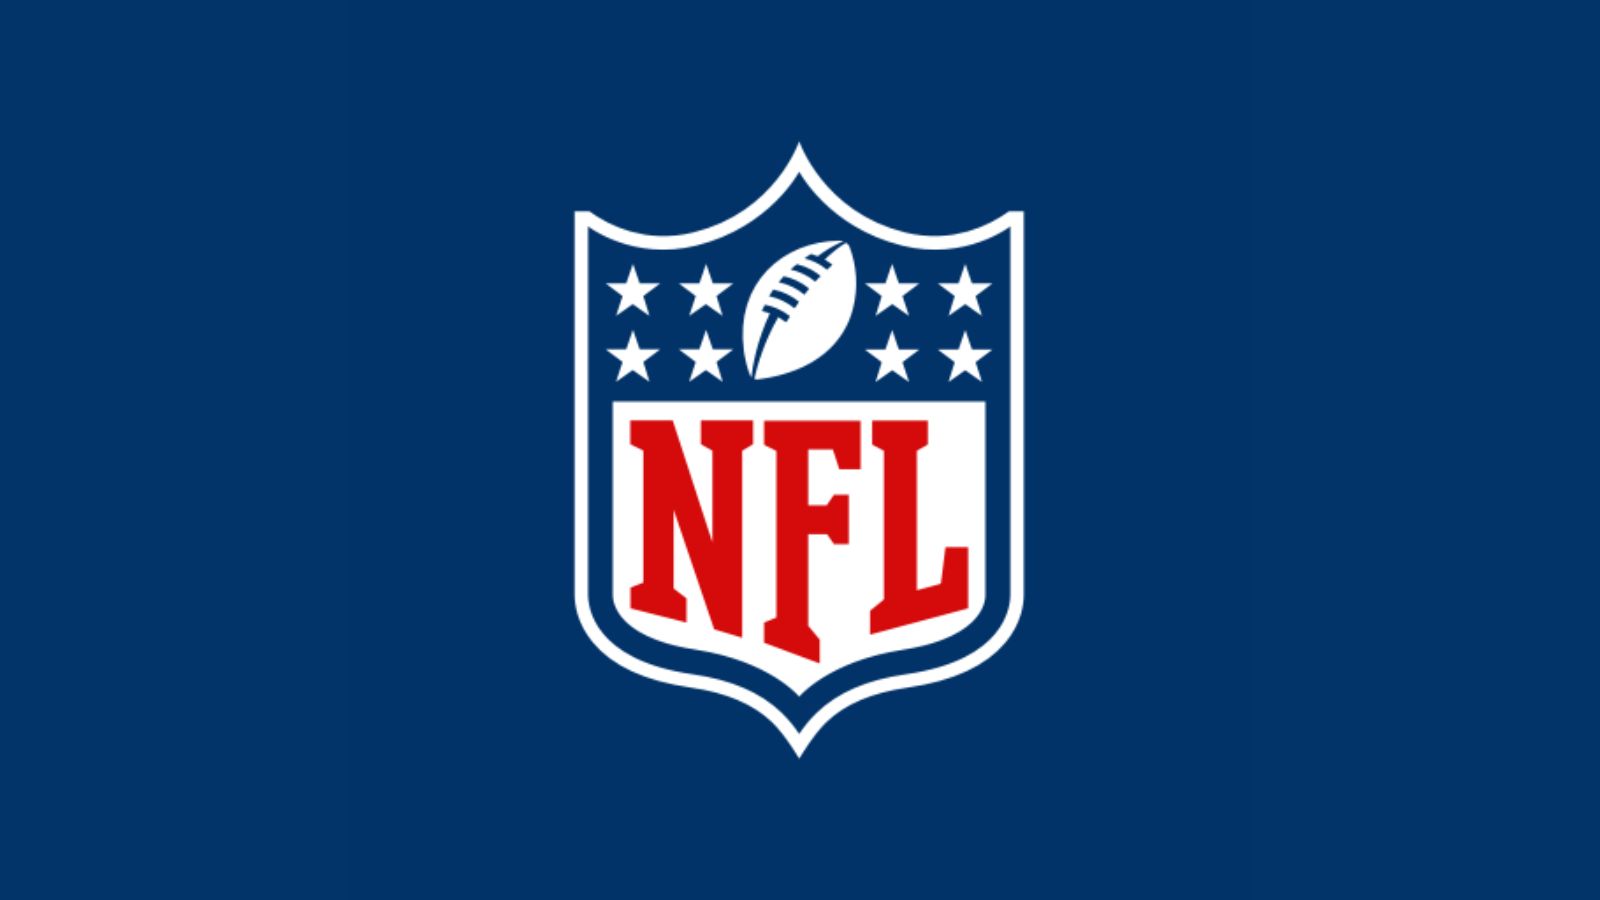 NFL's Stand for Justice